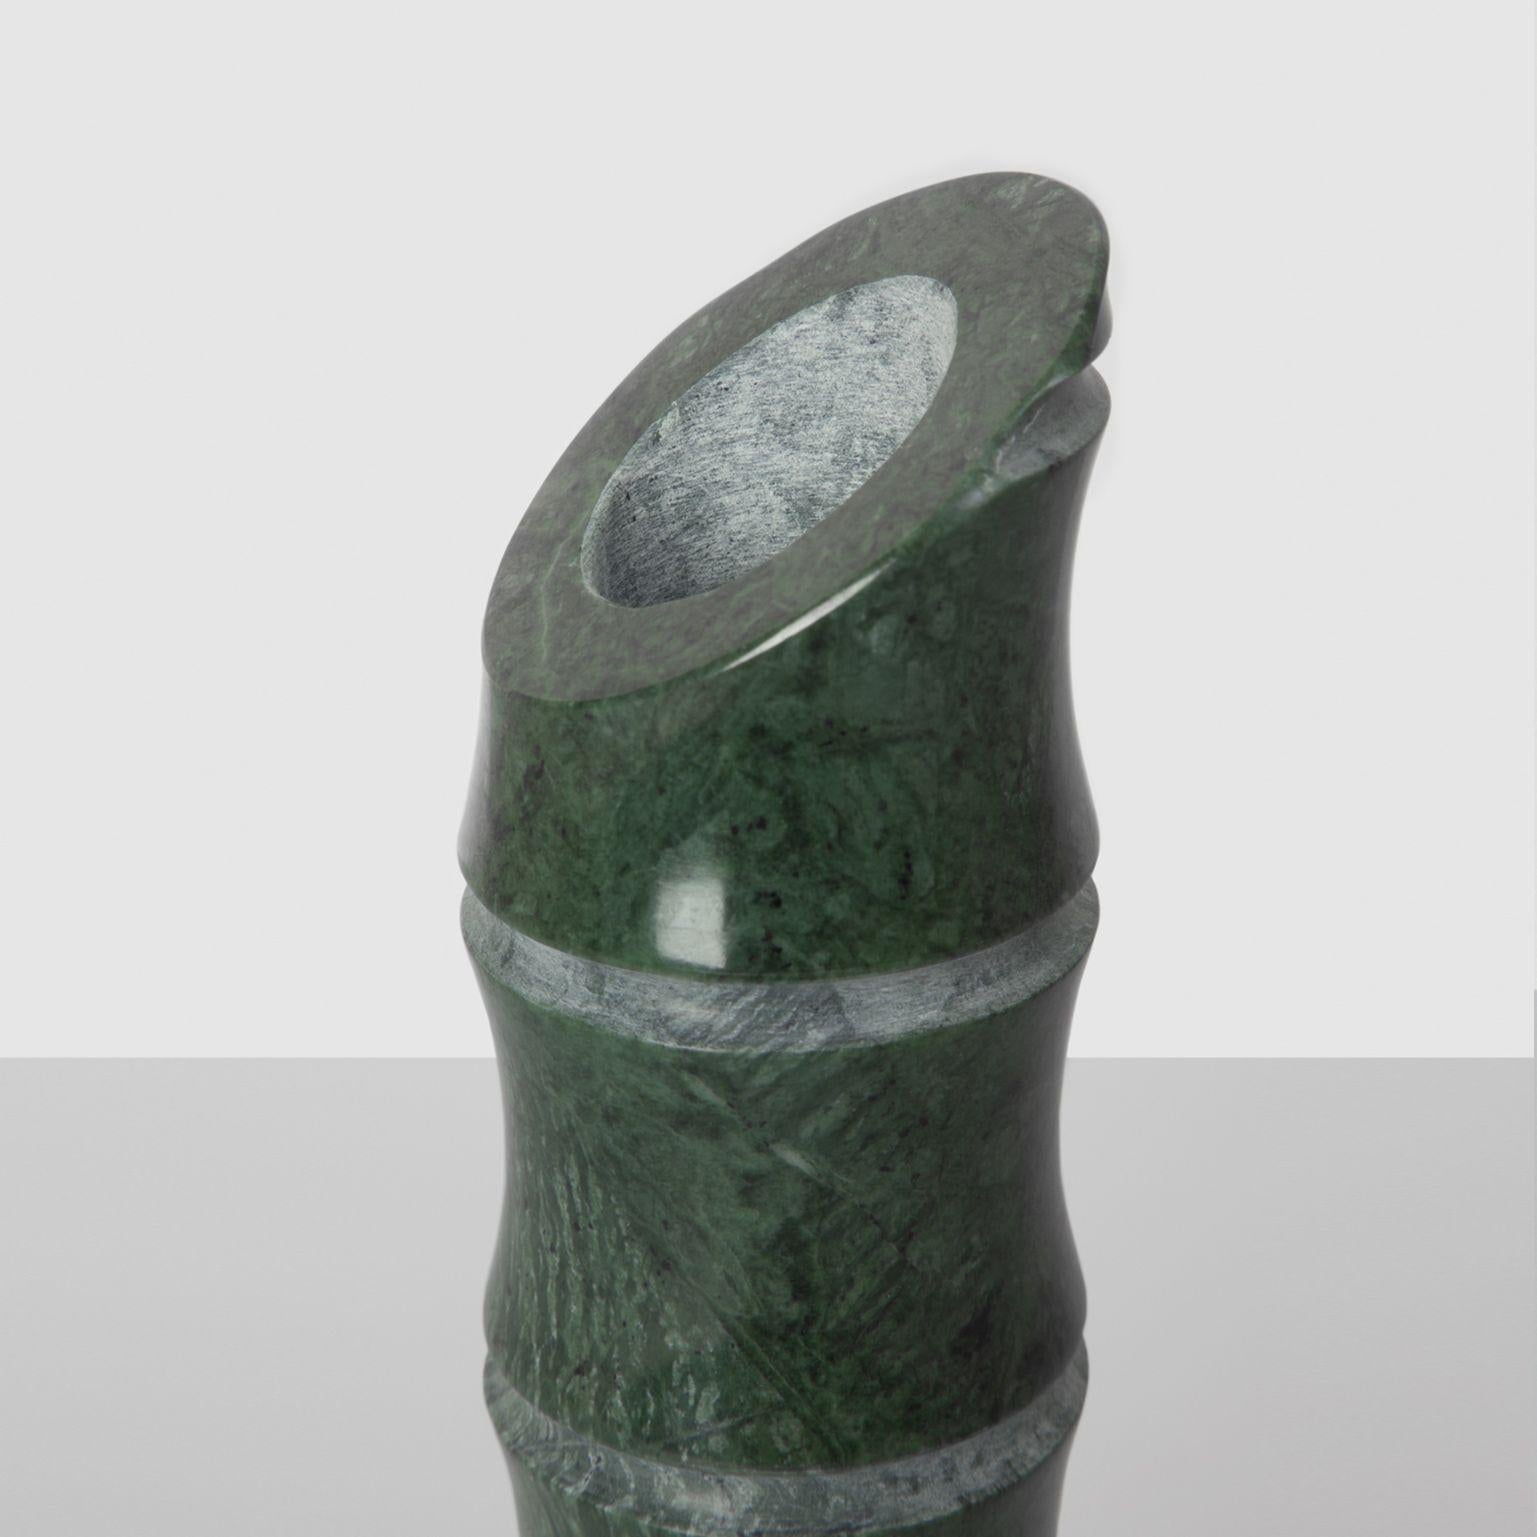 Kadomatsu Vase Medium by Michele Chiossi
Jap Vegetation Collection
Dimensions: 7 x 25 cm
Materials: Verde Guatemala

A zigzag line defines the illusory border between art and design. Chiossi crosses it entirely by creating a collection of